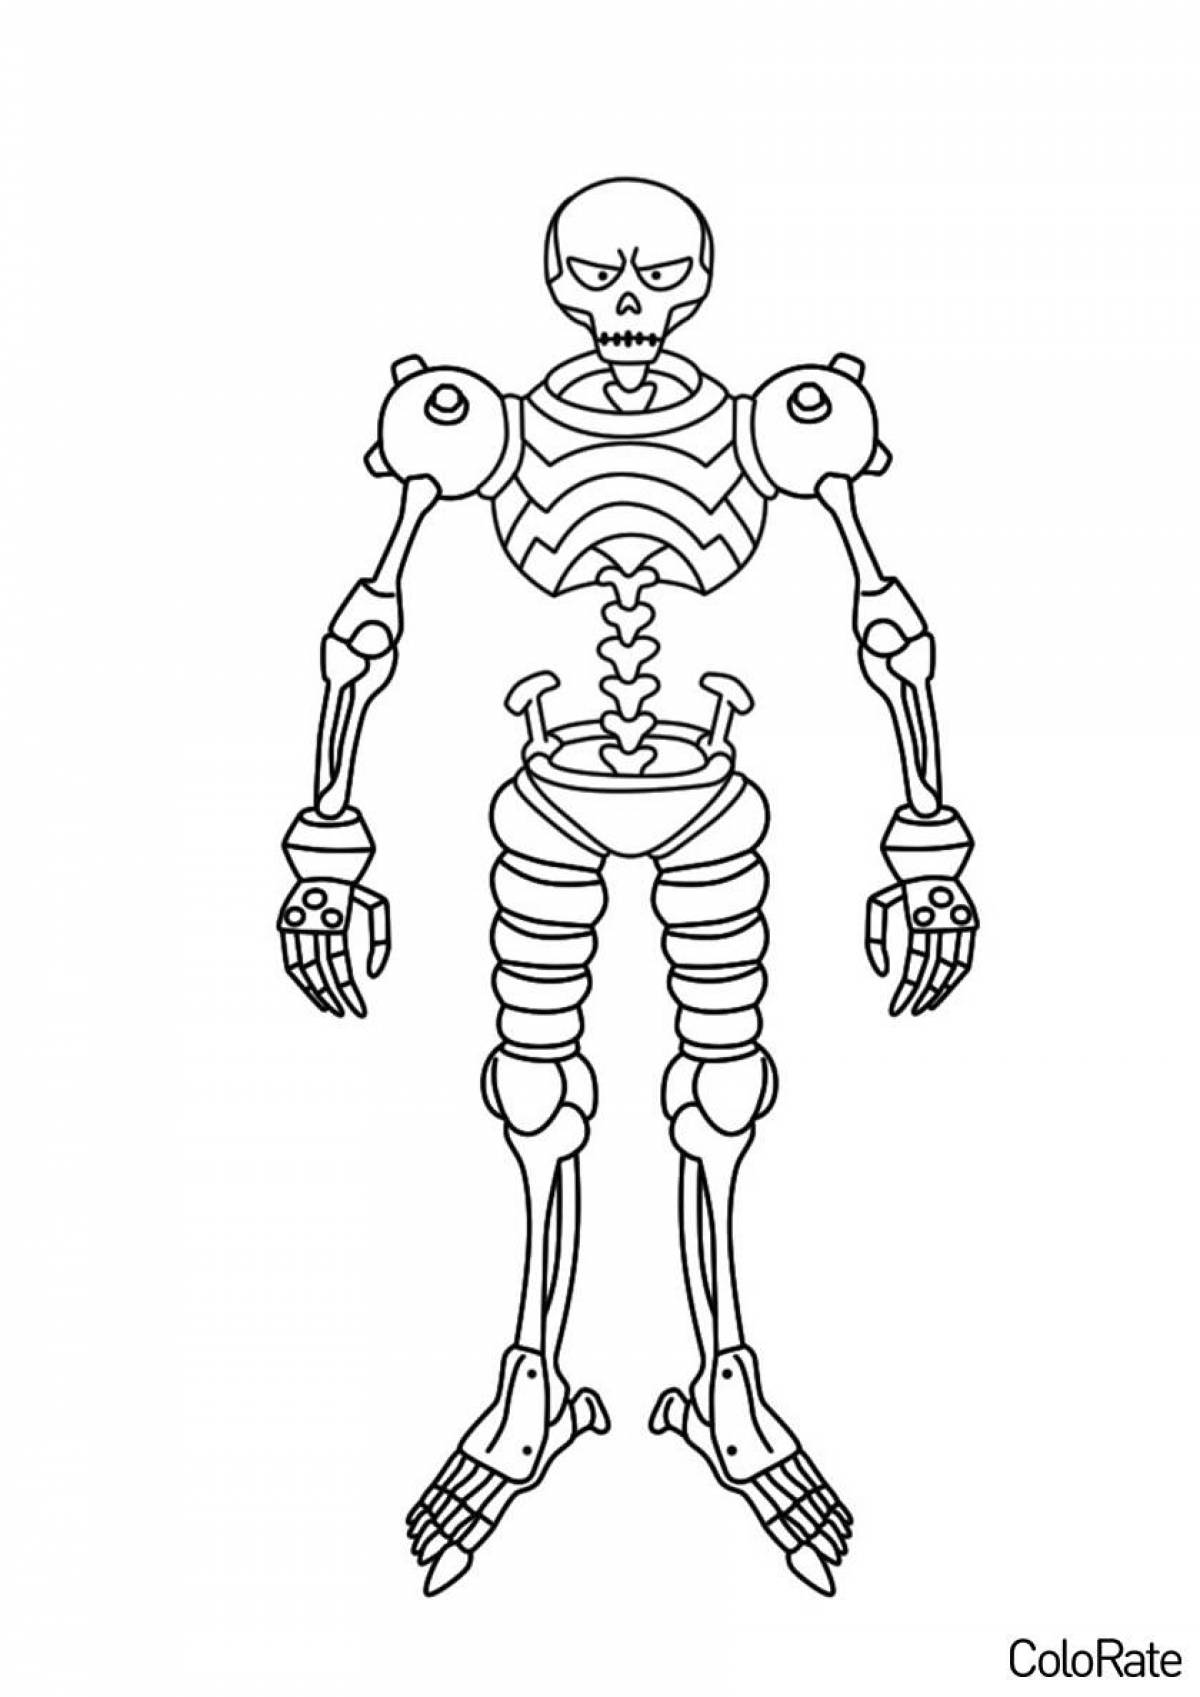 Exaggerated skeleton coloring page